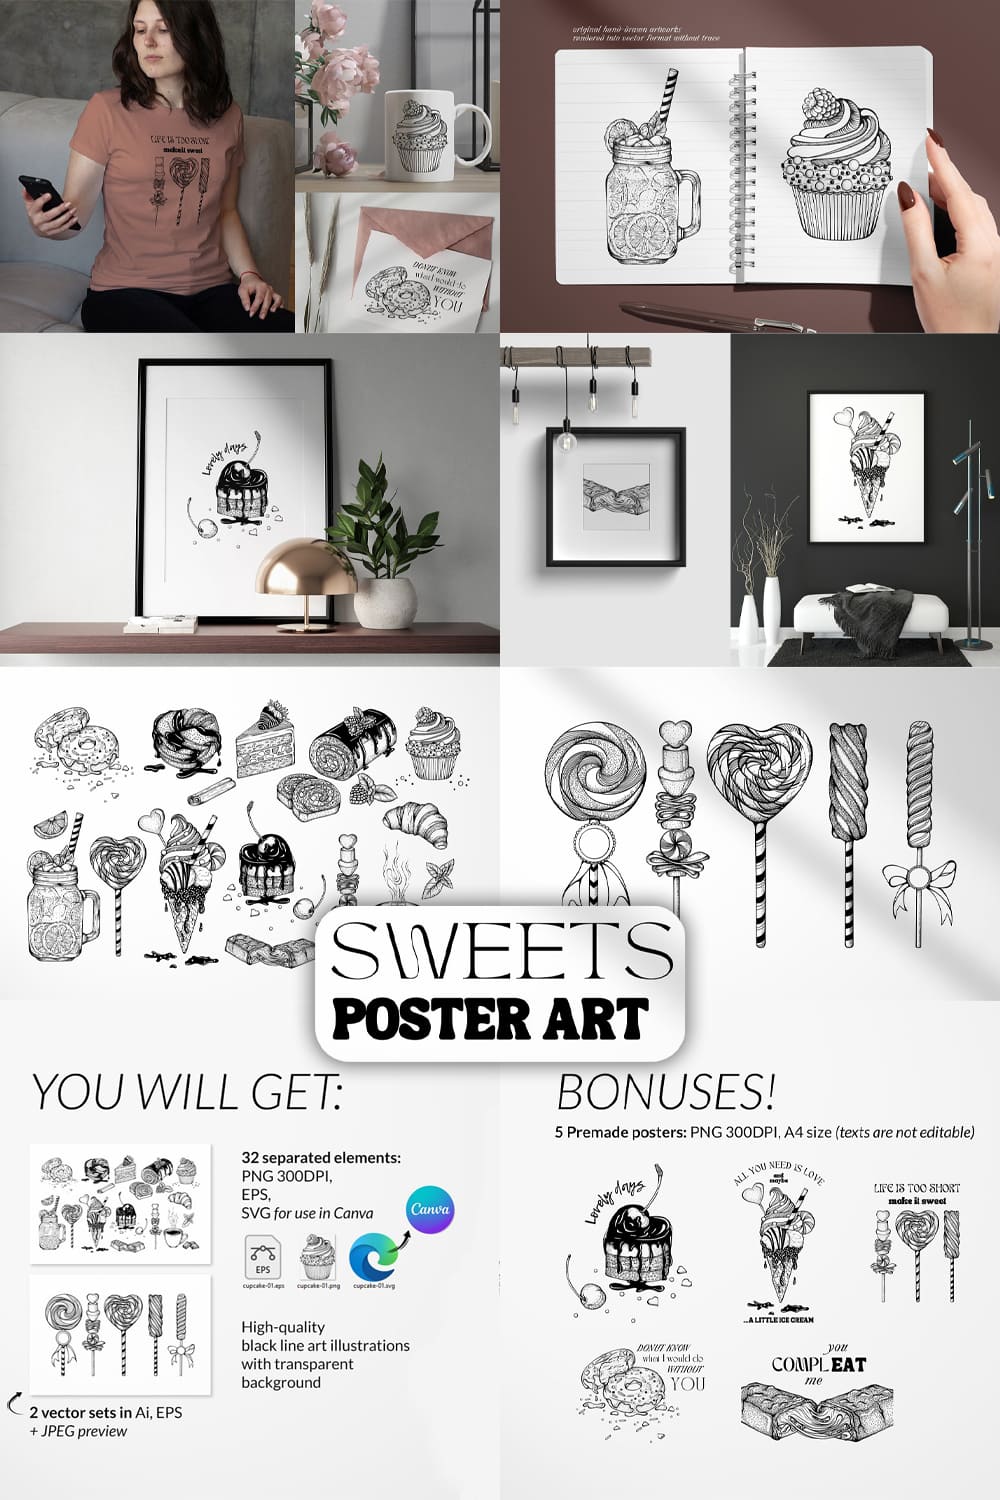 Sweets for poster art - Pinterest image preview.